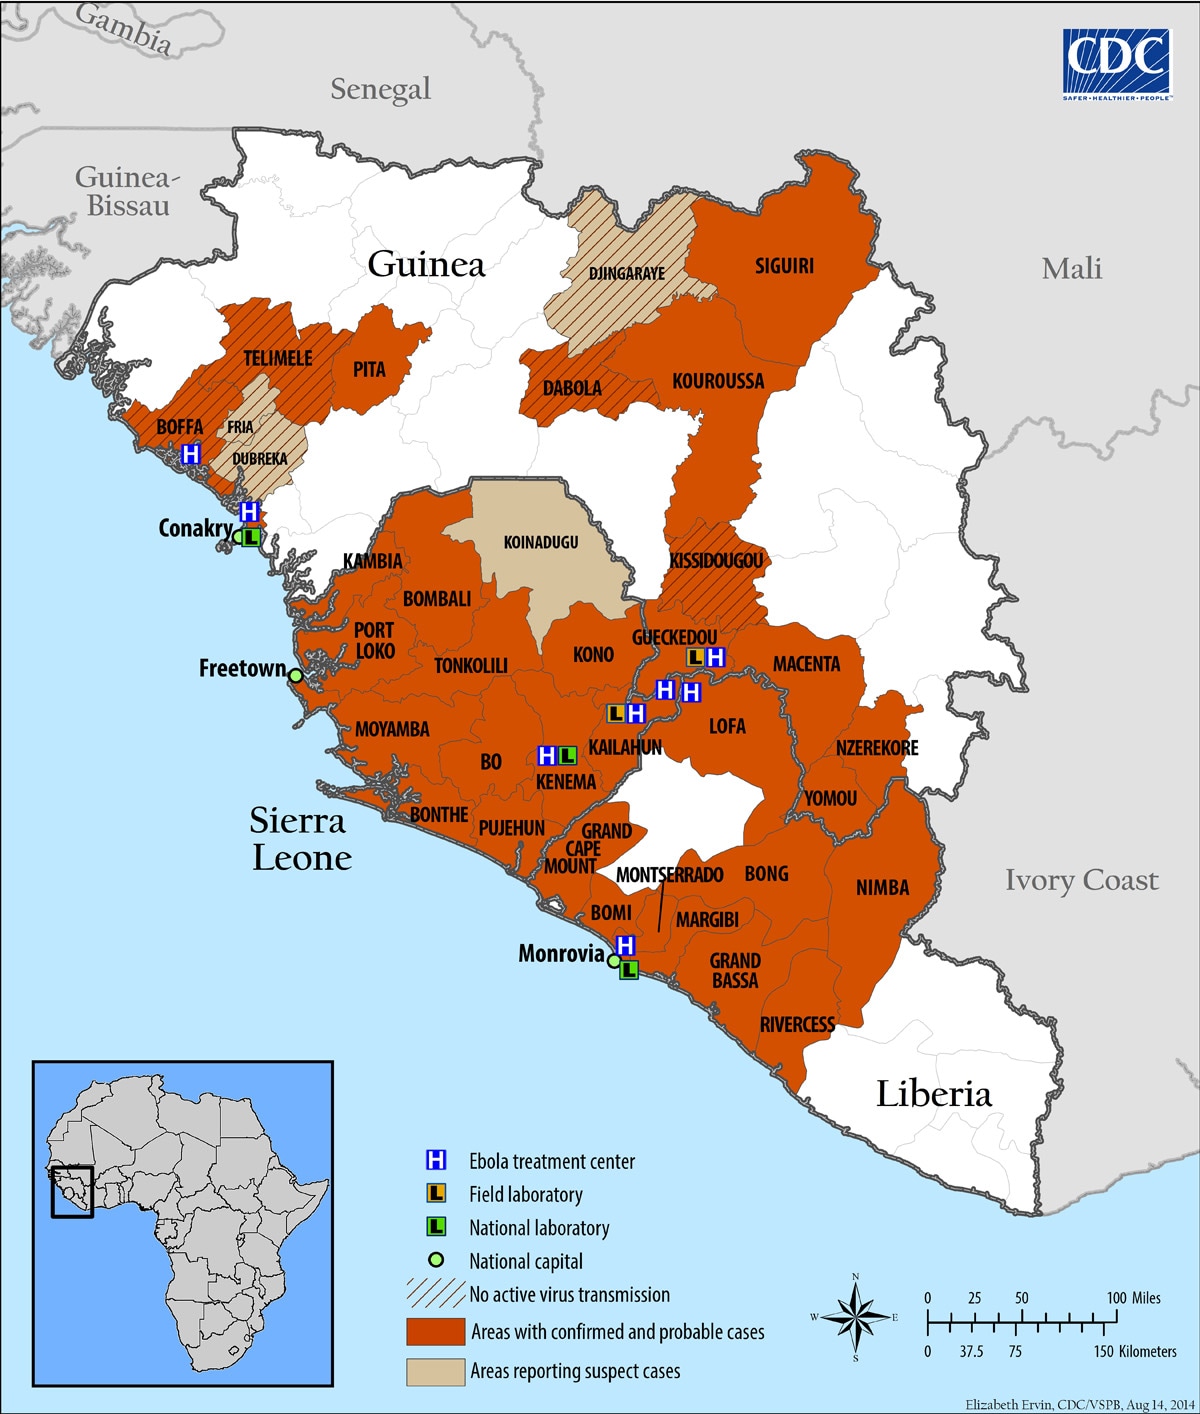 Distribution map showing districts and cities reporting suspect cases of Ebola